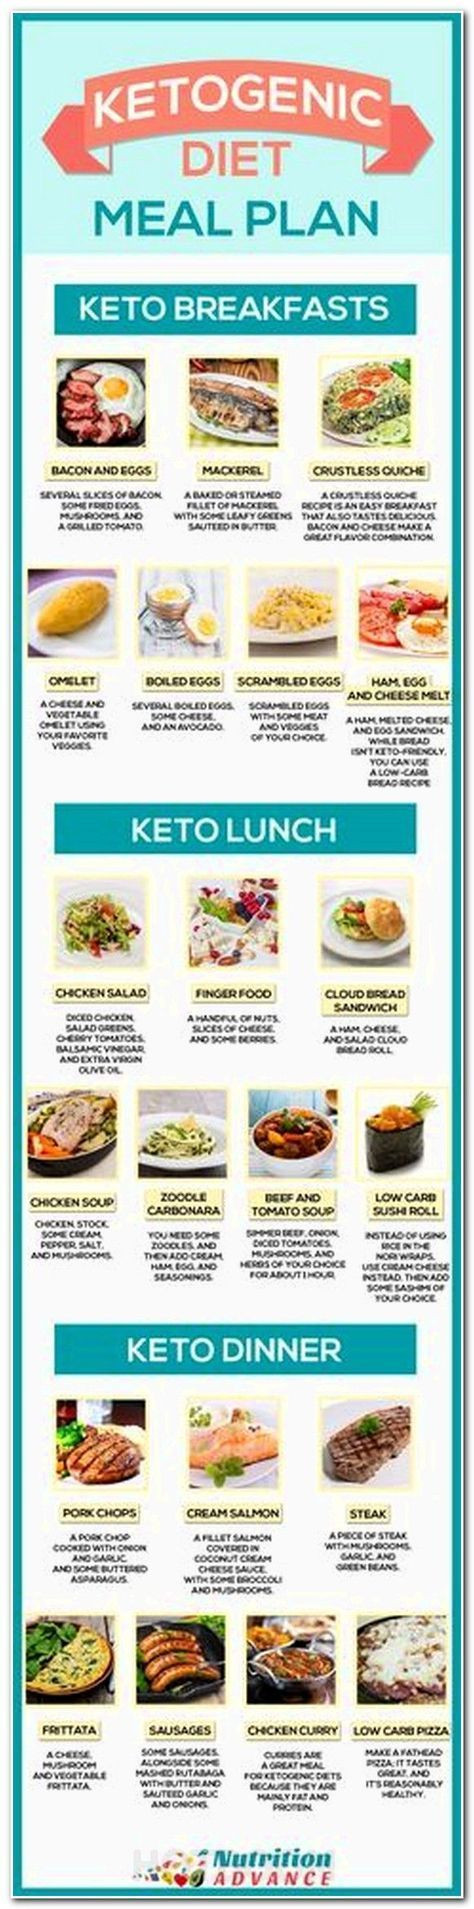 Keto Diet Plan For Women Indian
 over 40 t plan good snacks healthy t and workout